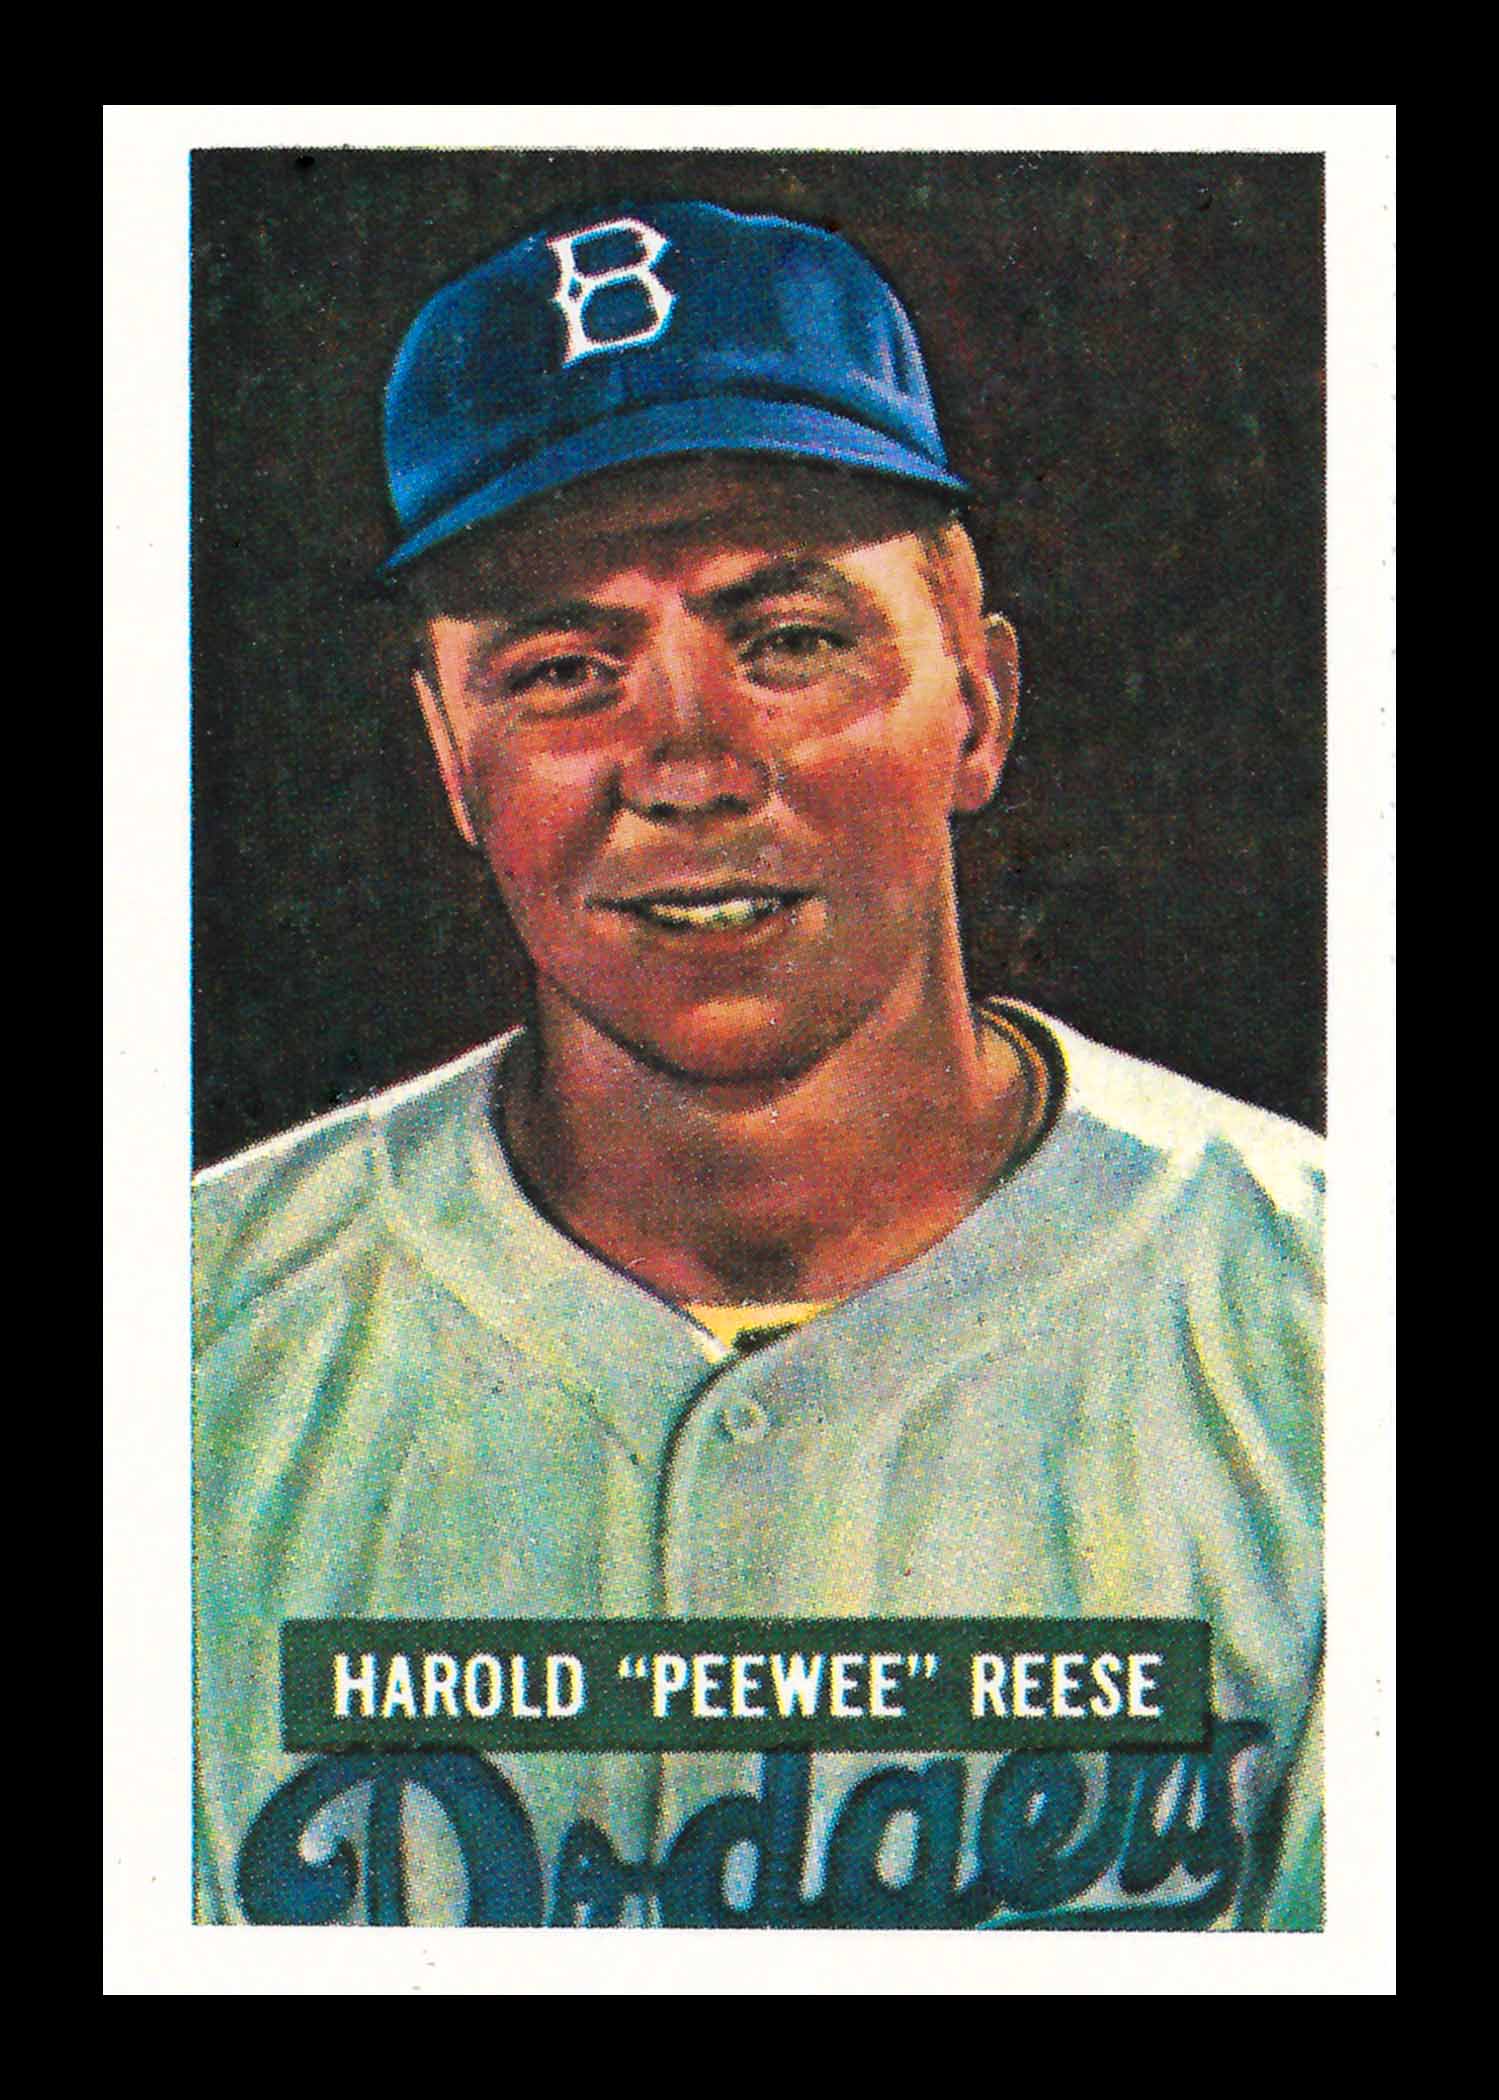 Pee Wee Reese by Kidwiler Collection